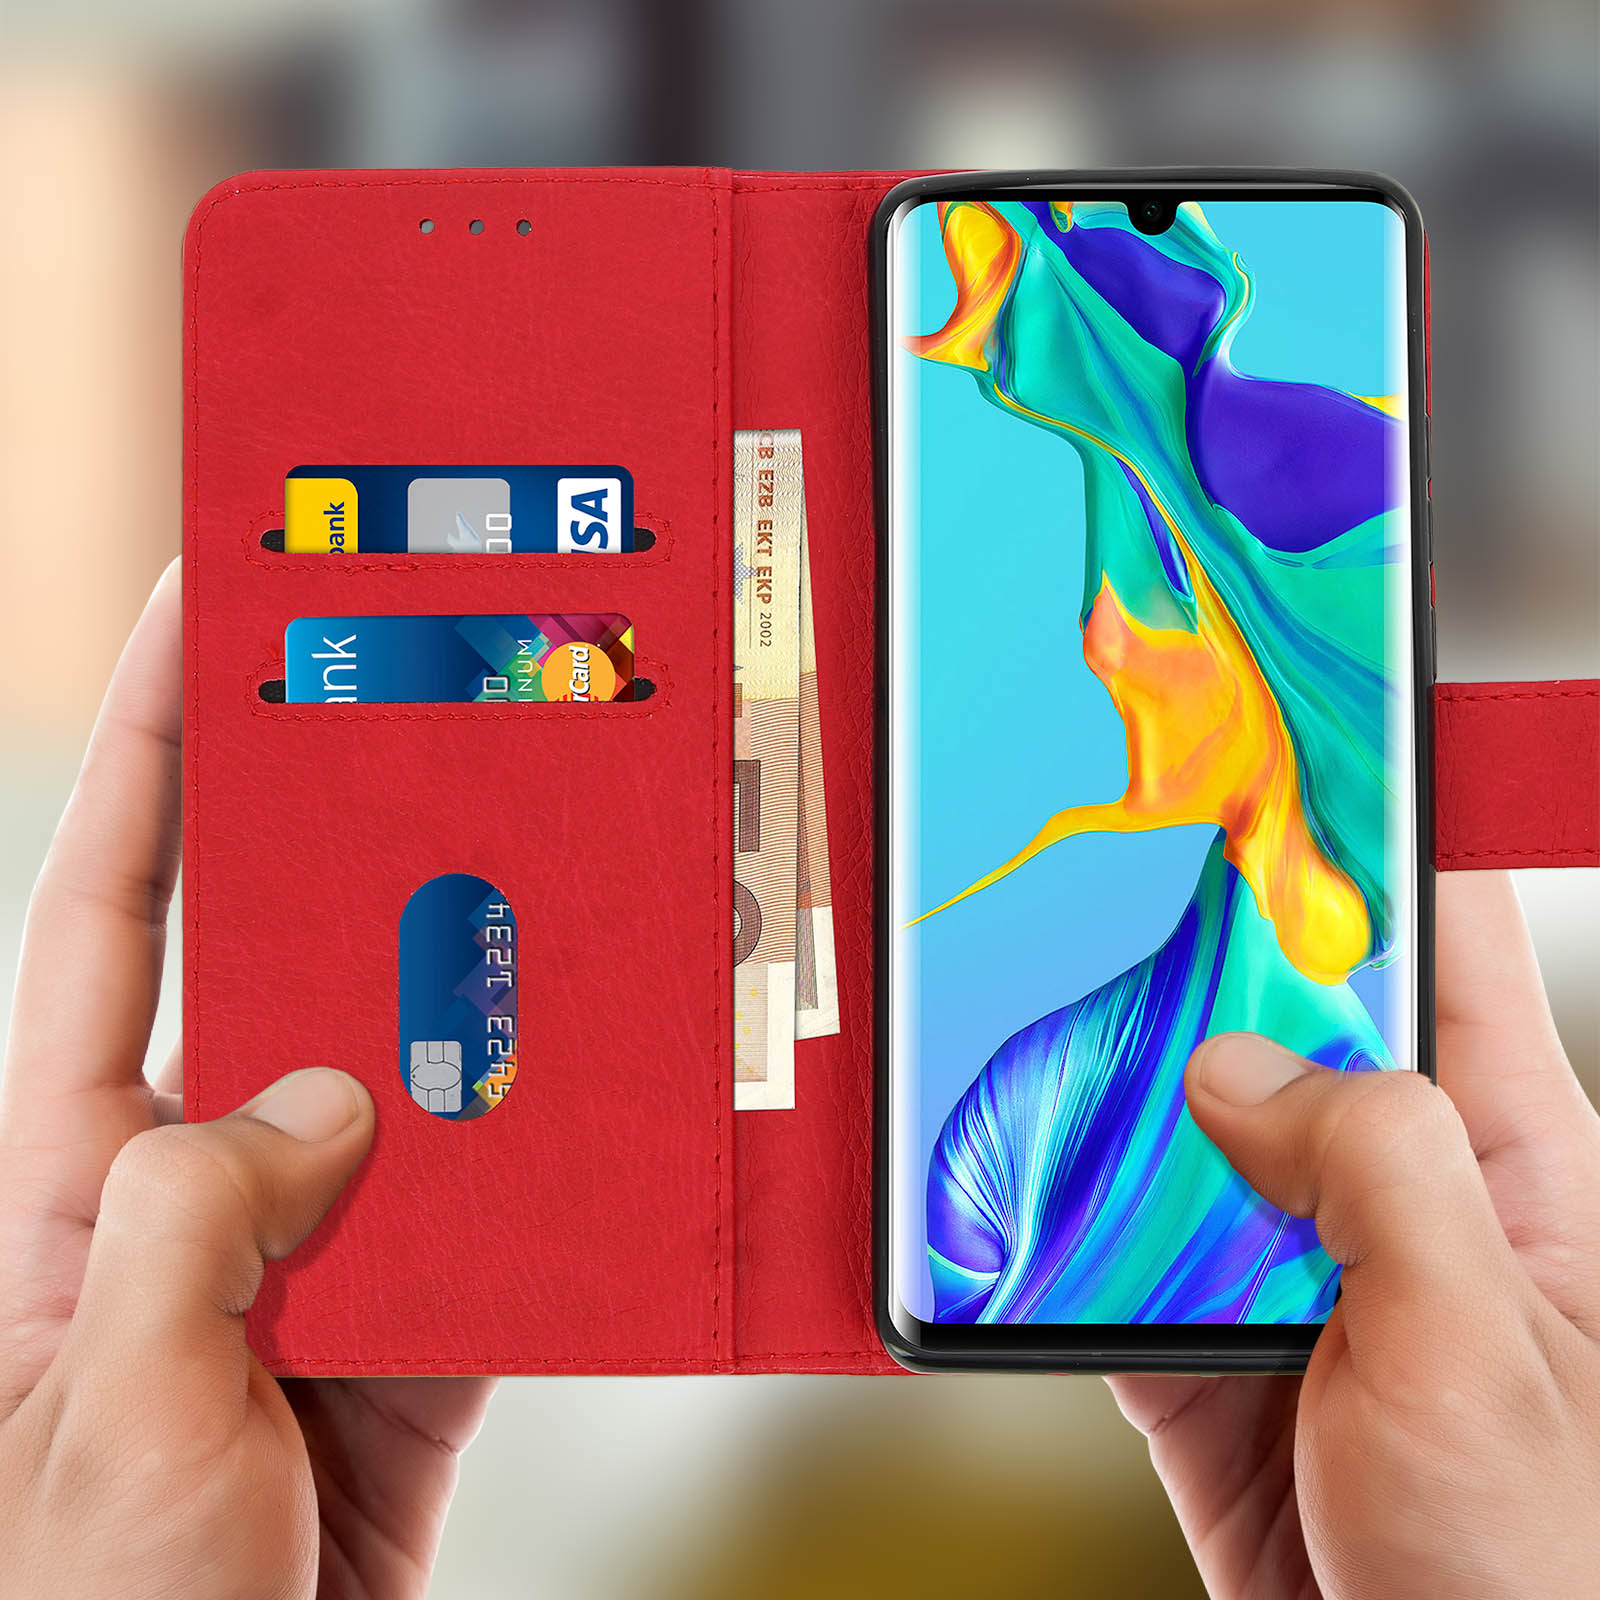 AVIZAR Chester Series, Bookcover, Huawei, Rot Pro, P30